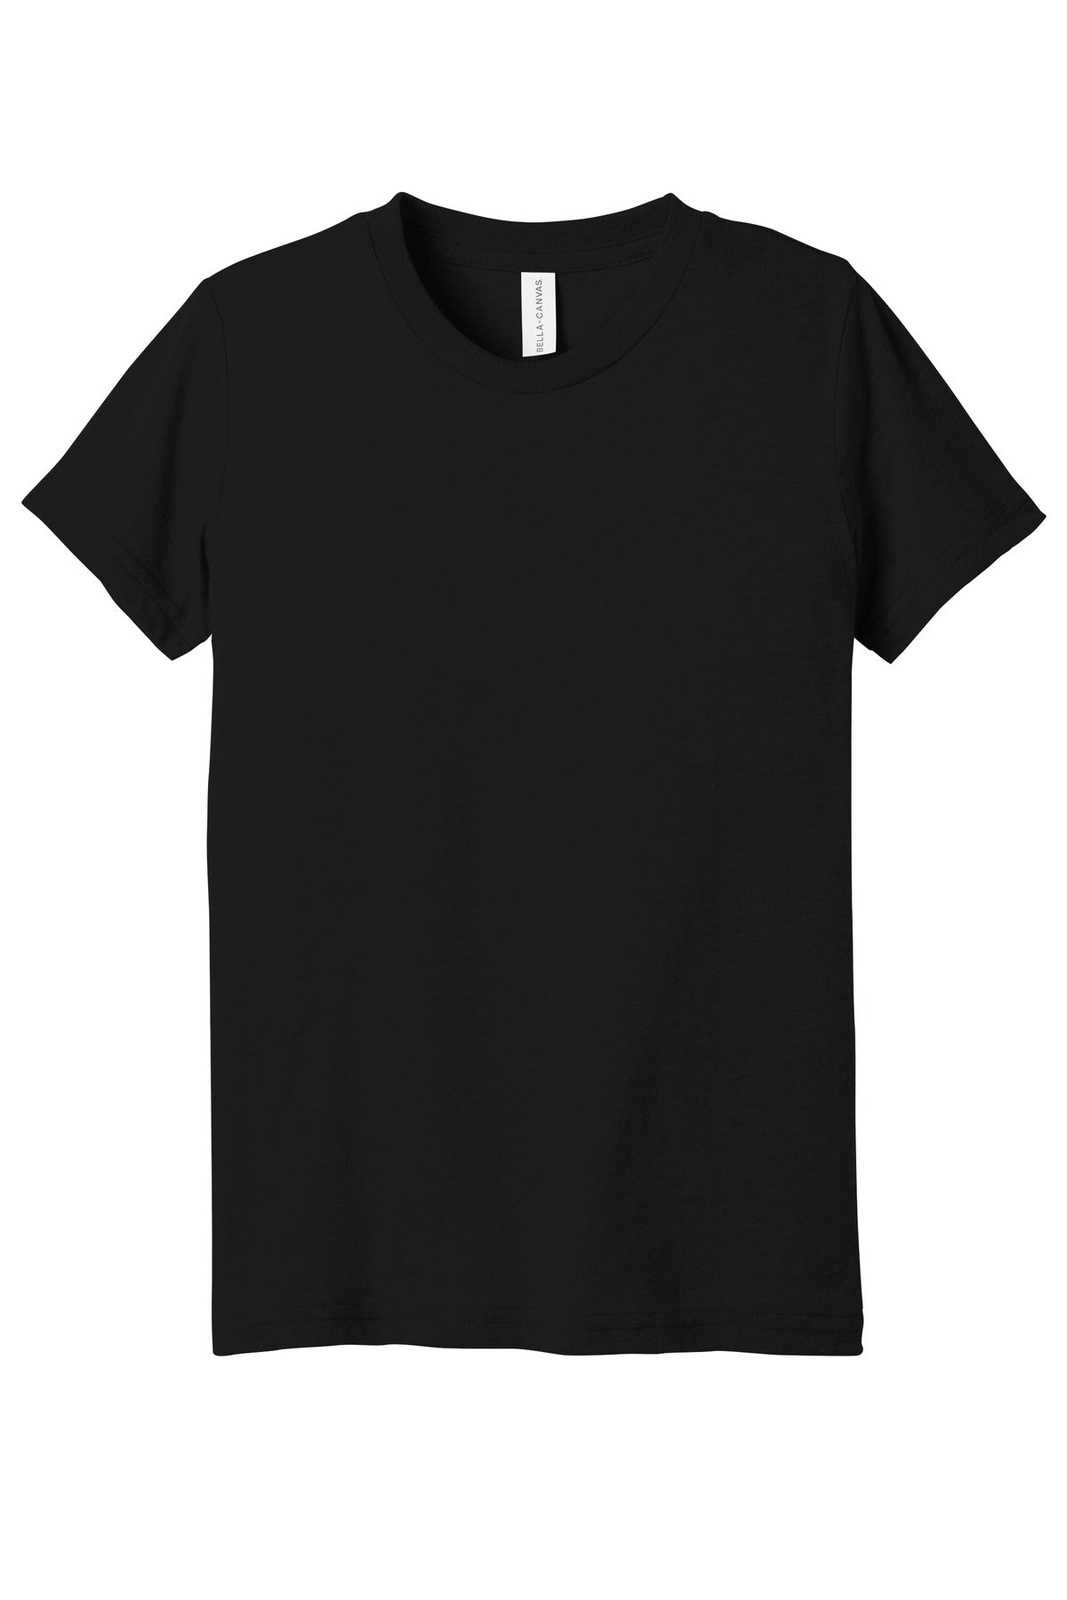 Bella + Canvas 3413Y Youth Triblend Short Sleeve Tee - Solid Black Triblend - HIT a Double